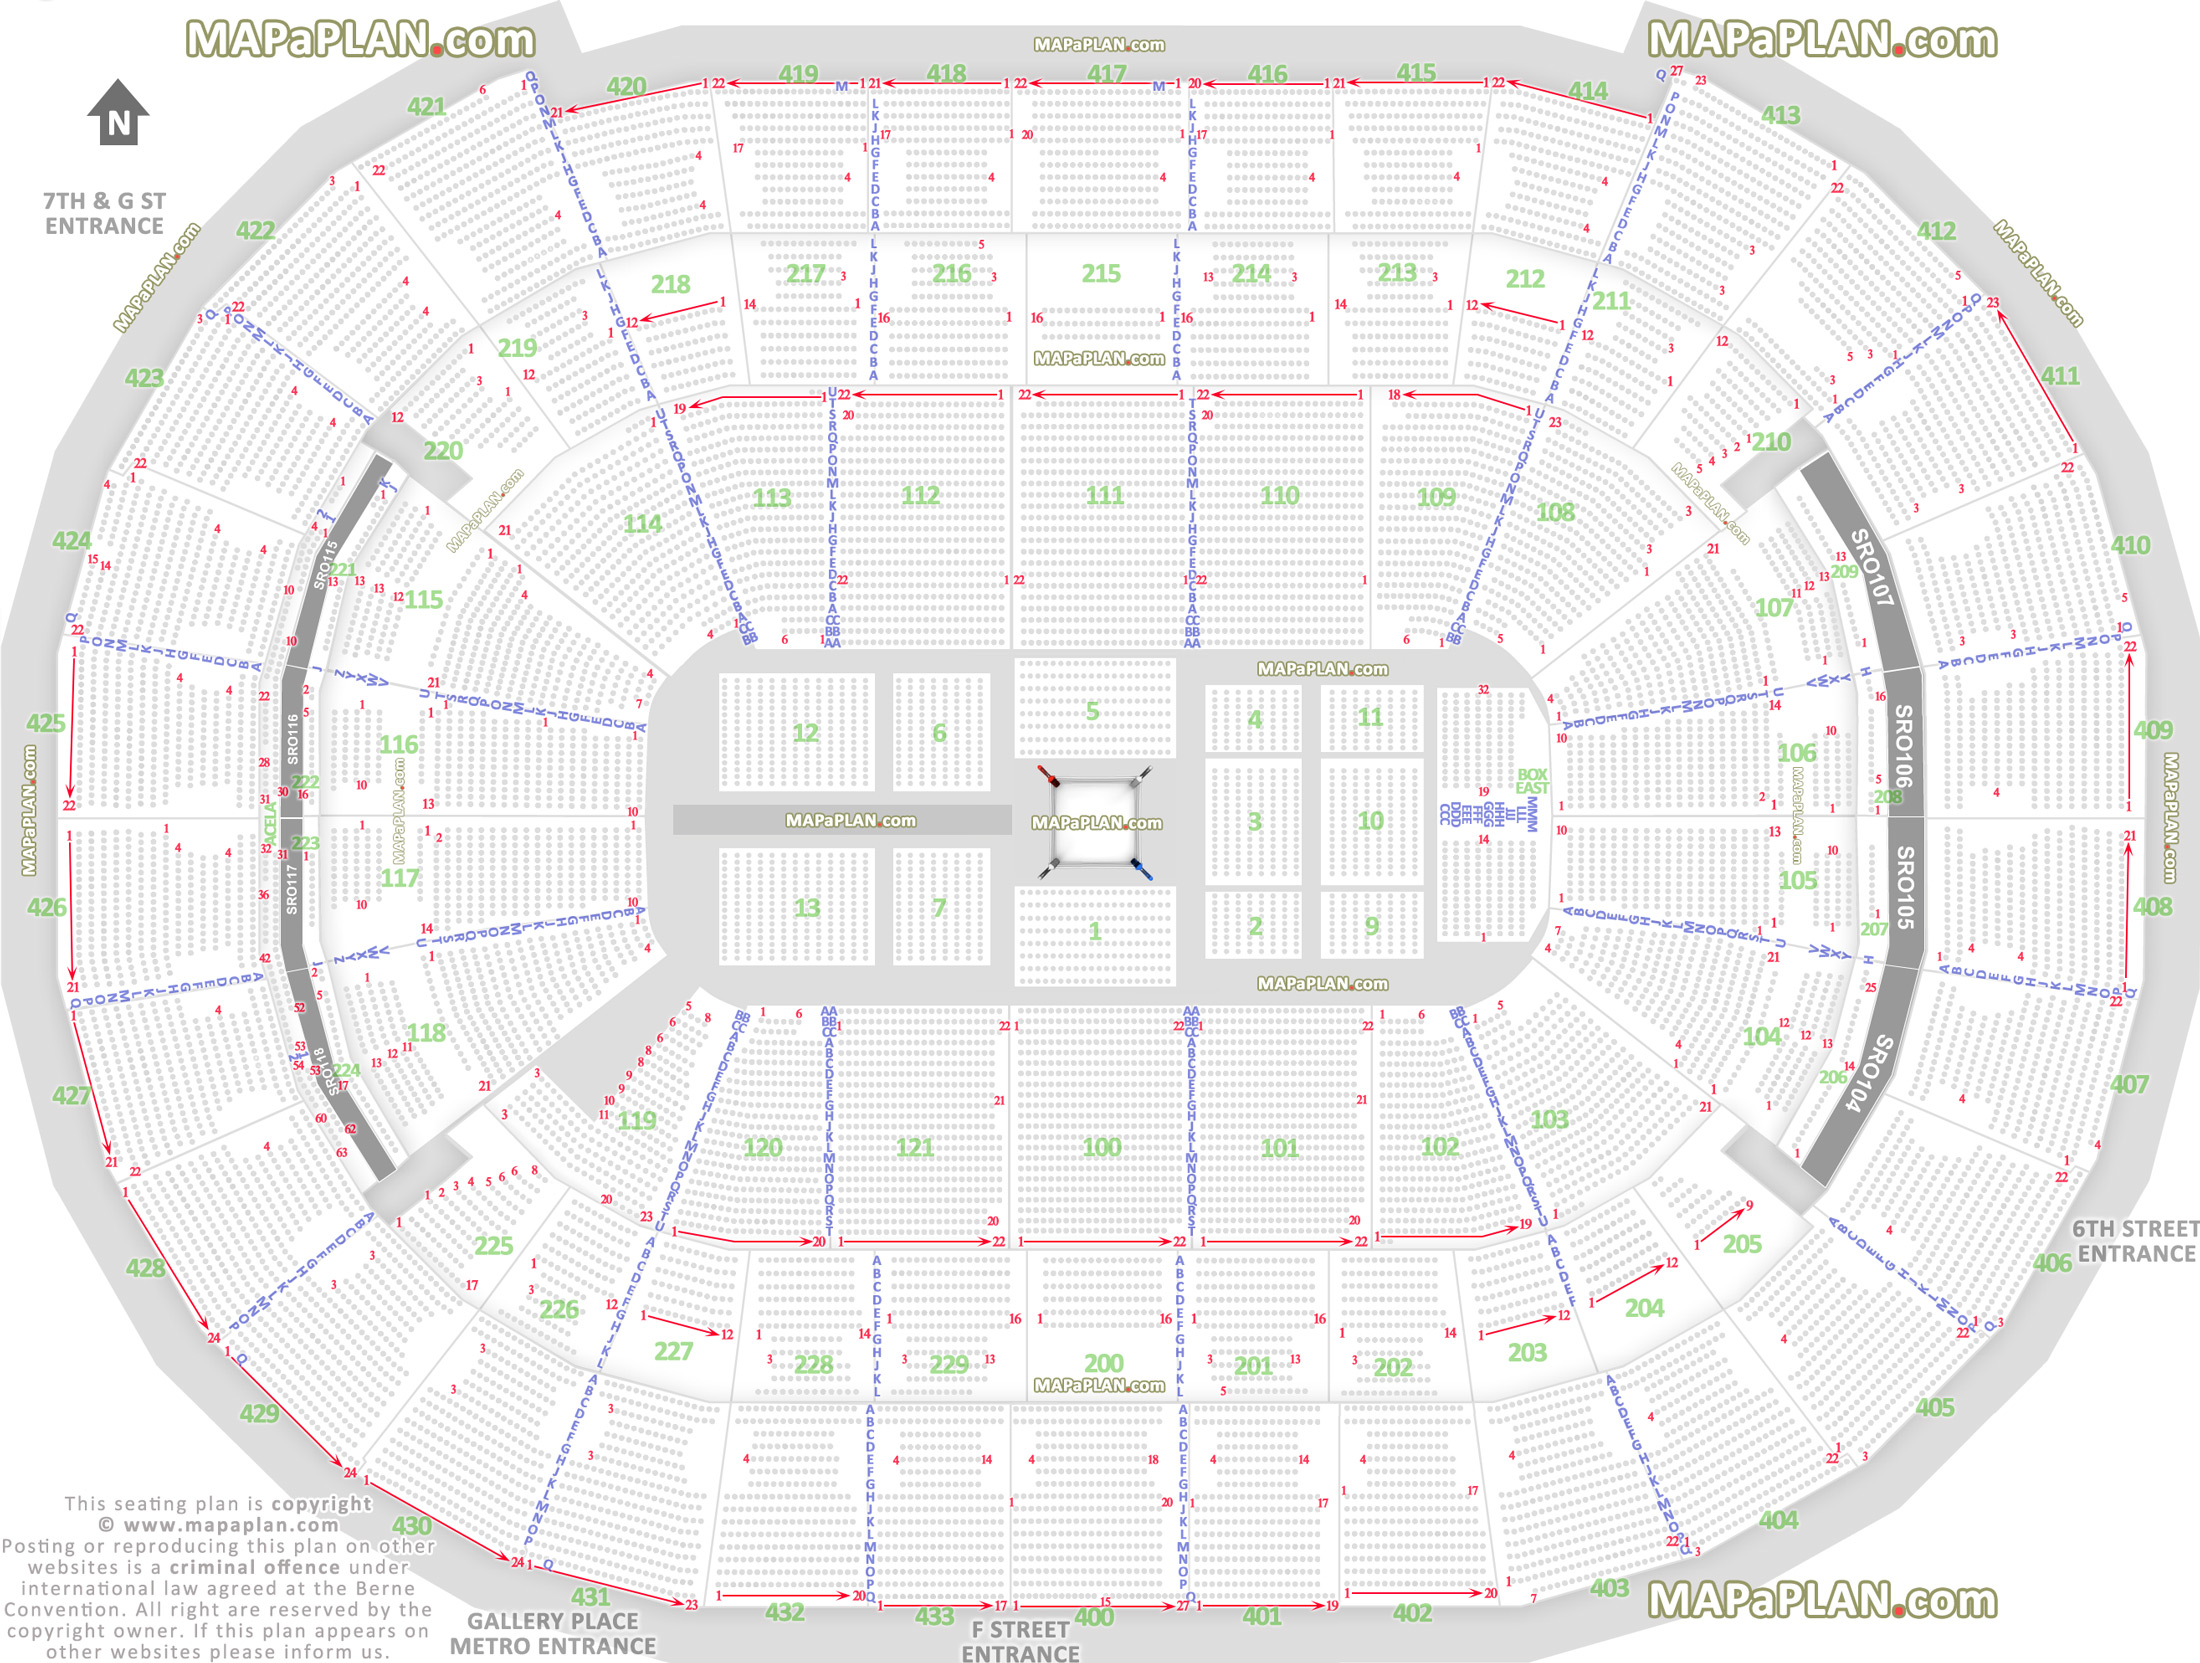 Verizon Seating Chart With Rows